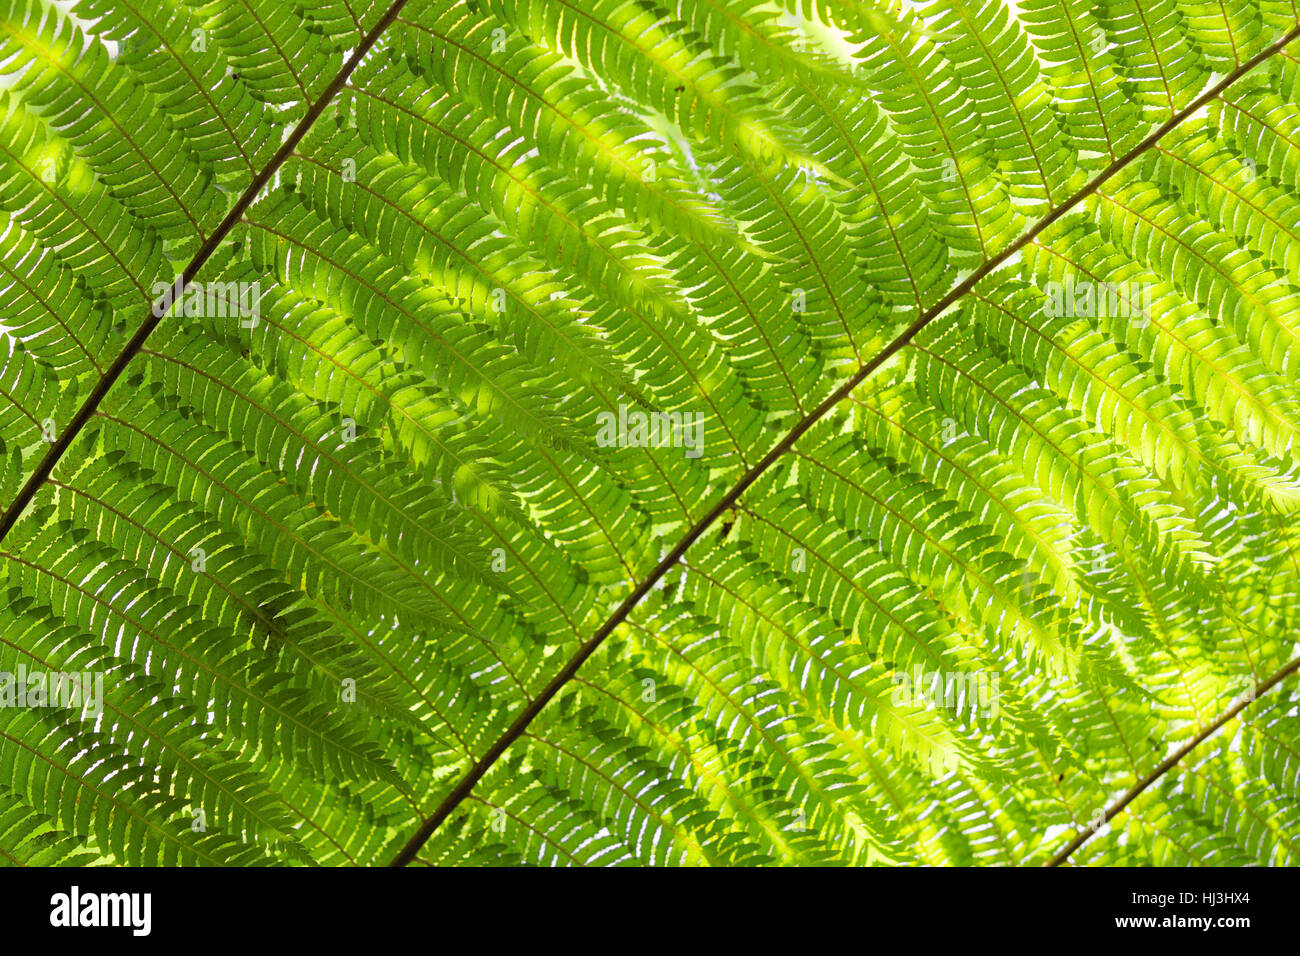 Sunlight backlit fern fronds leaves natural floral background with shallow deepth of field. Cyathea dealbata is unofficial symbol of New Zealand. Stock Photo